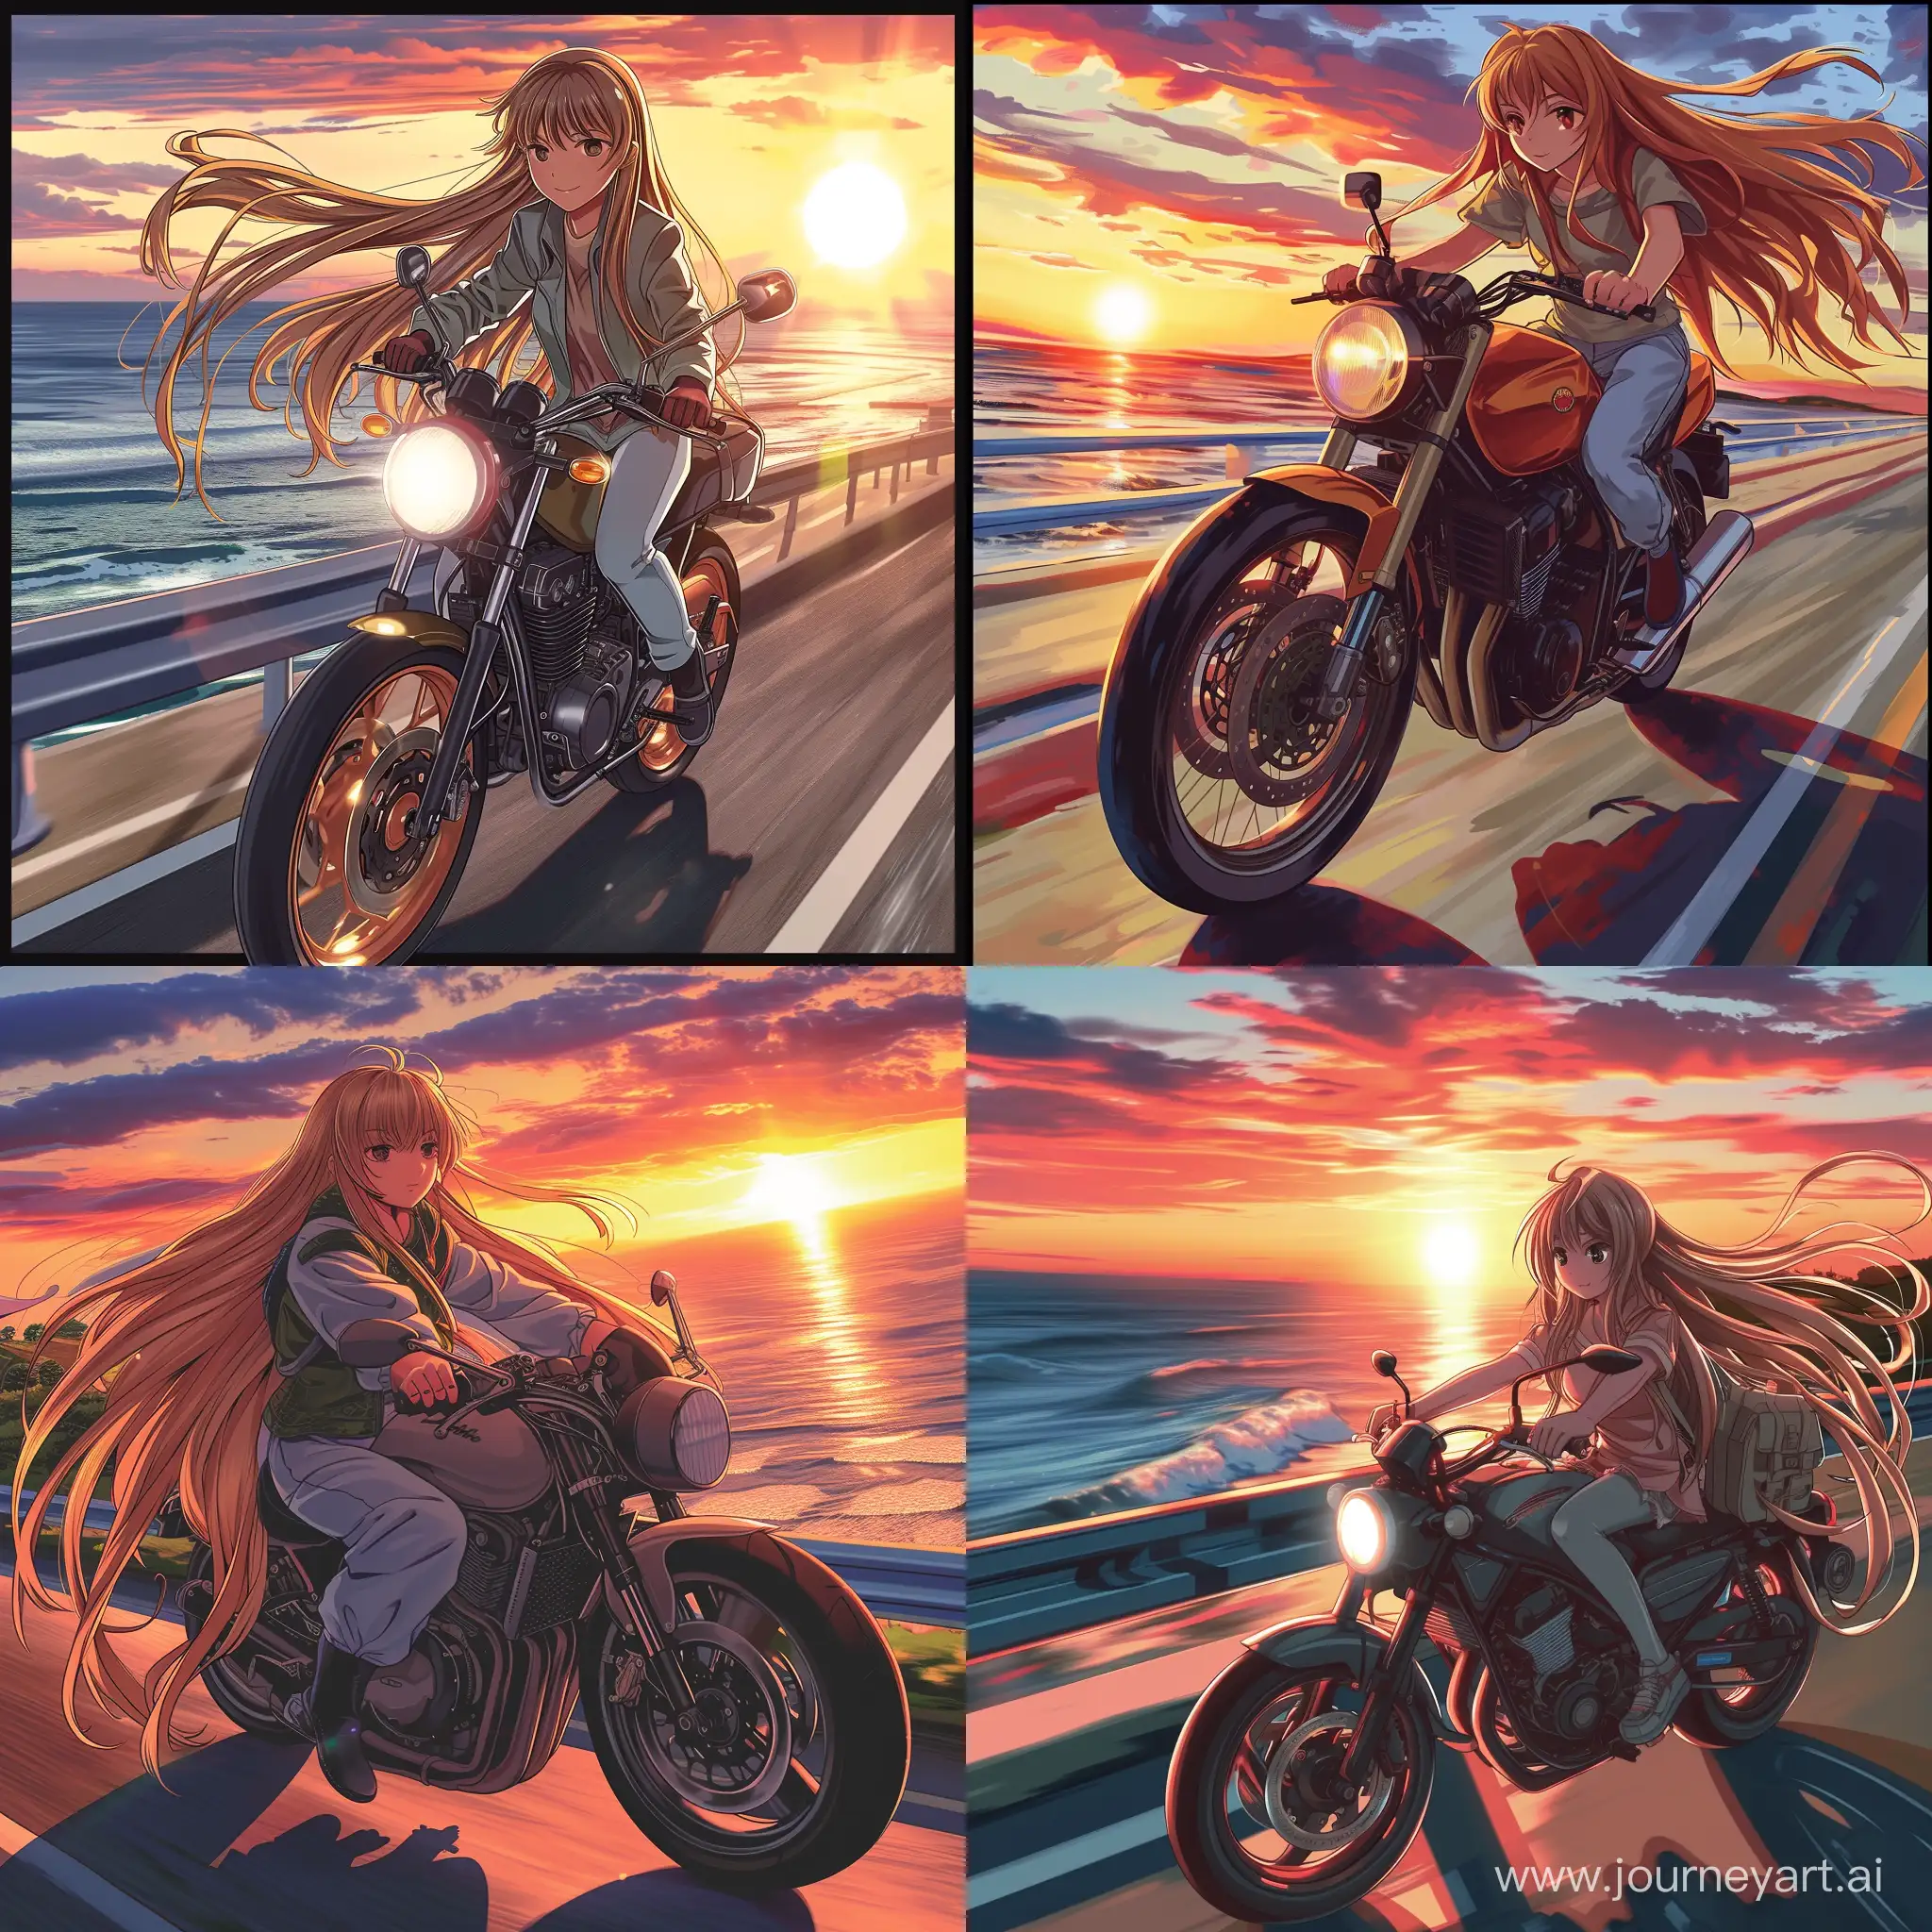 LongHaired-Student-Biker-Racing-at-Sunset-by-the-Sea-Retro-Anime-Style